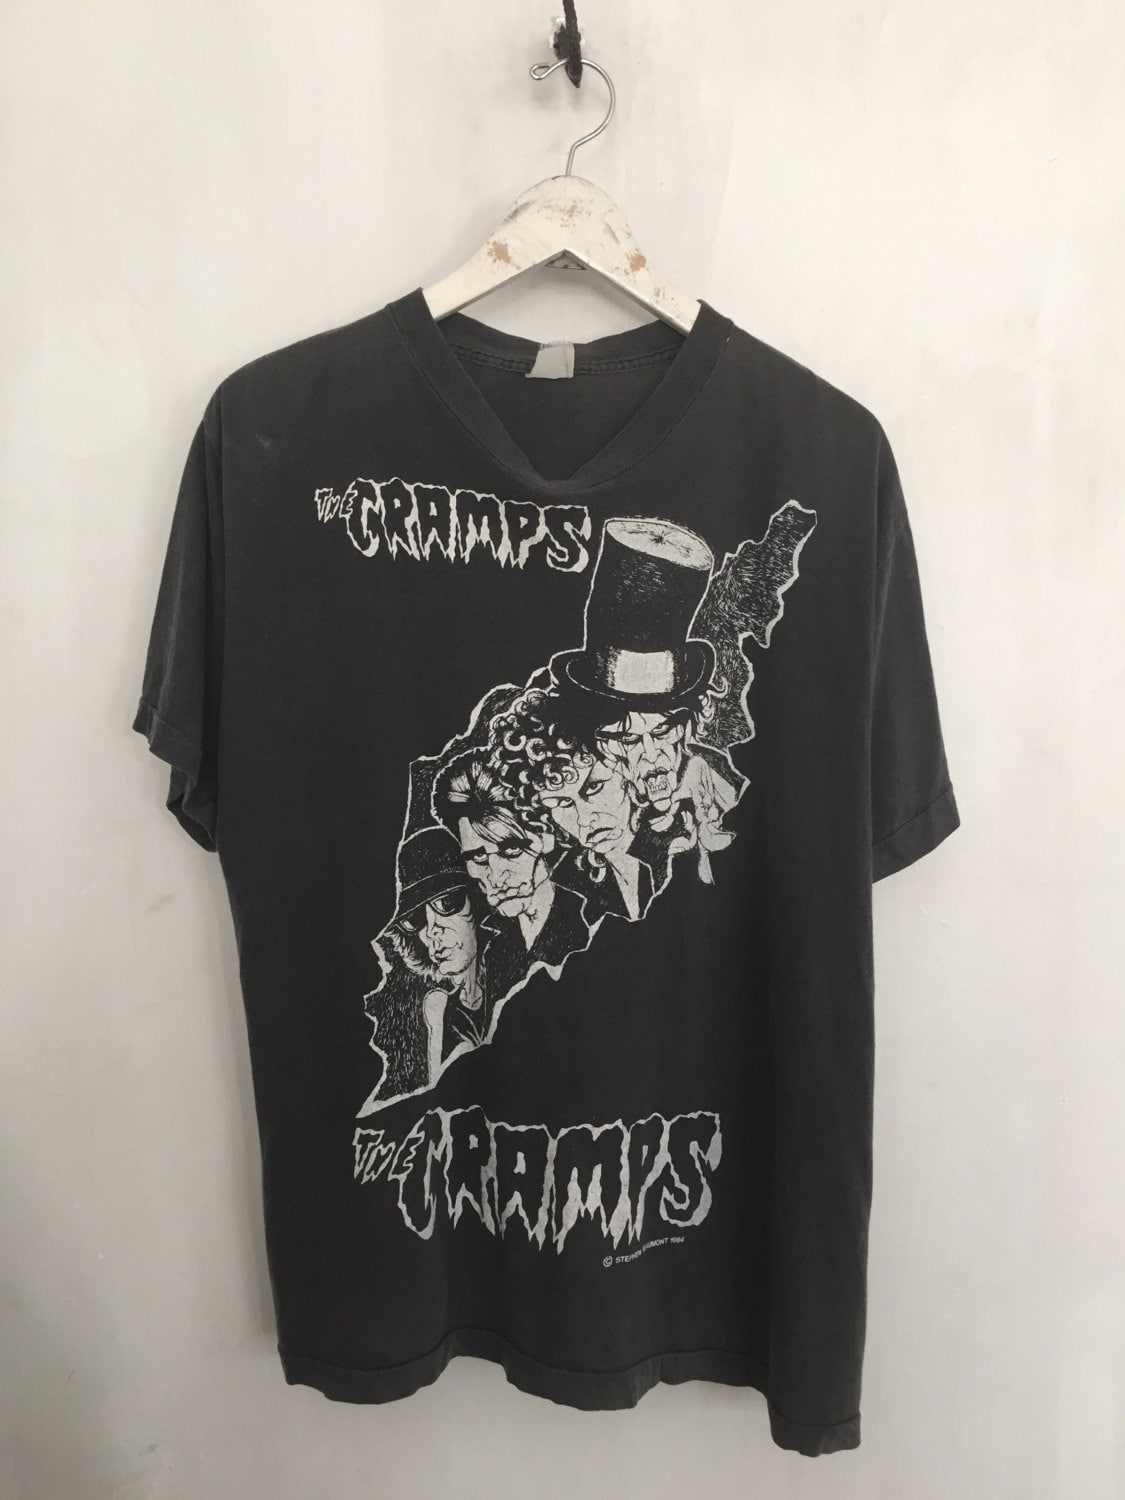 The Cramps shirt 1984 vintage t shirt Smell of by CottonFever